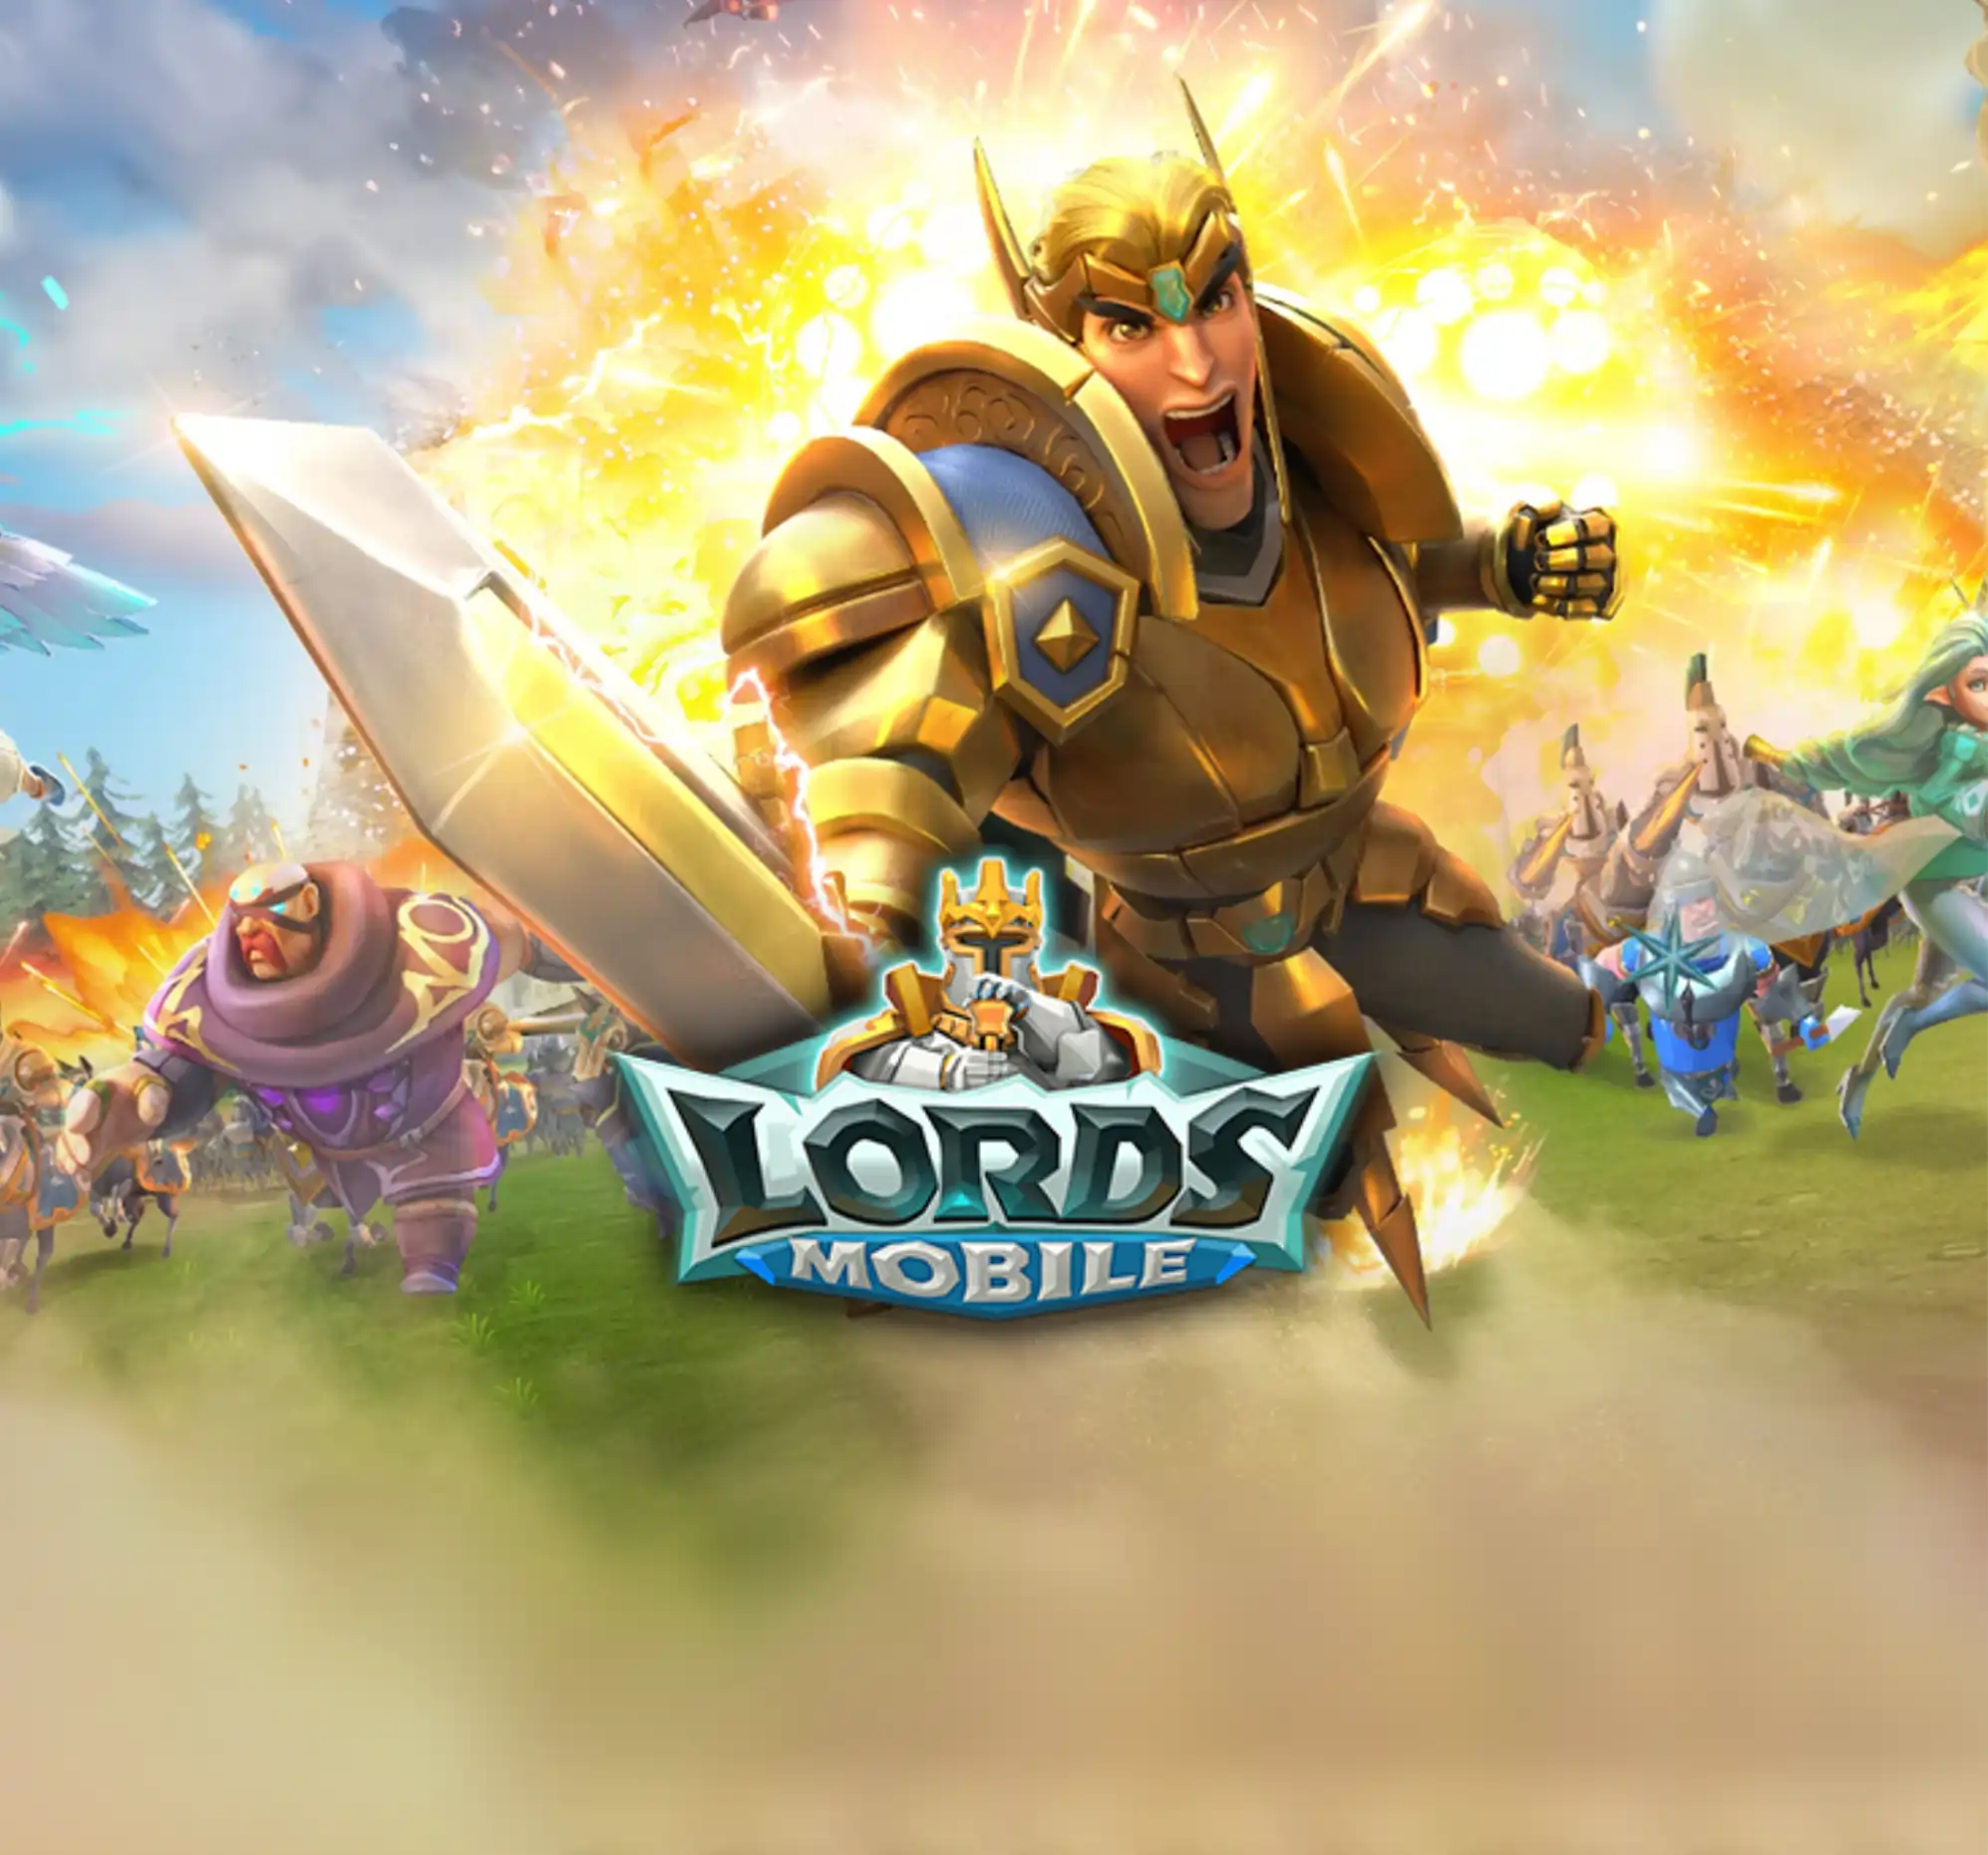  Lords Mobile